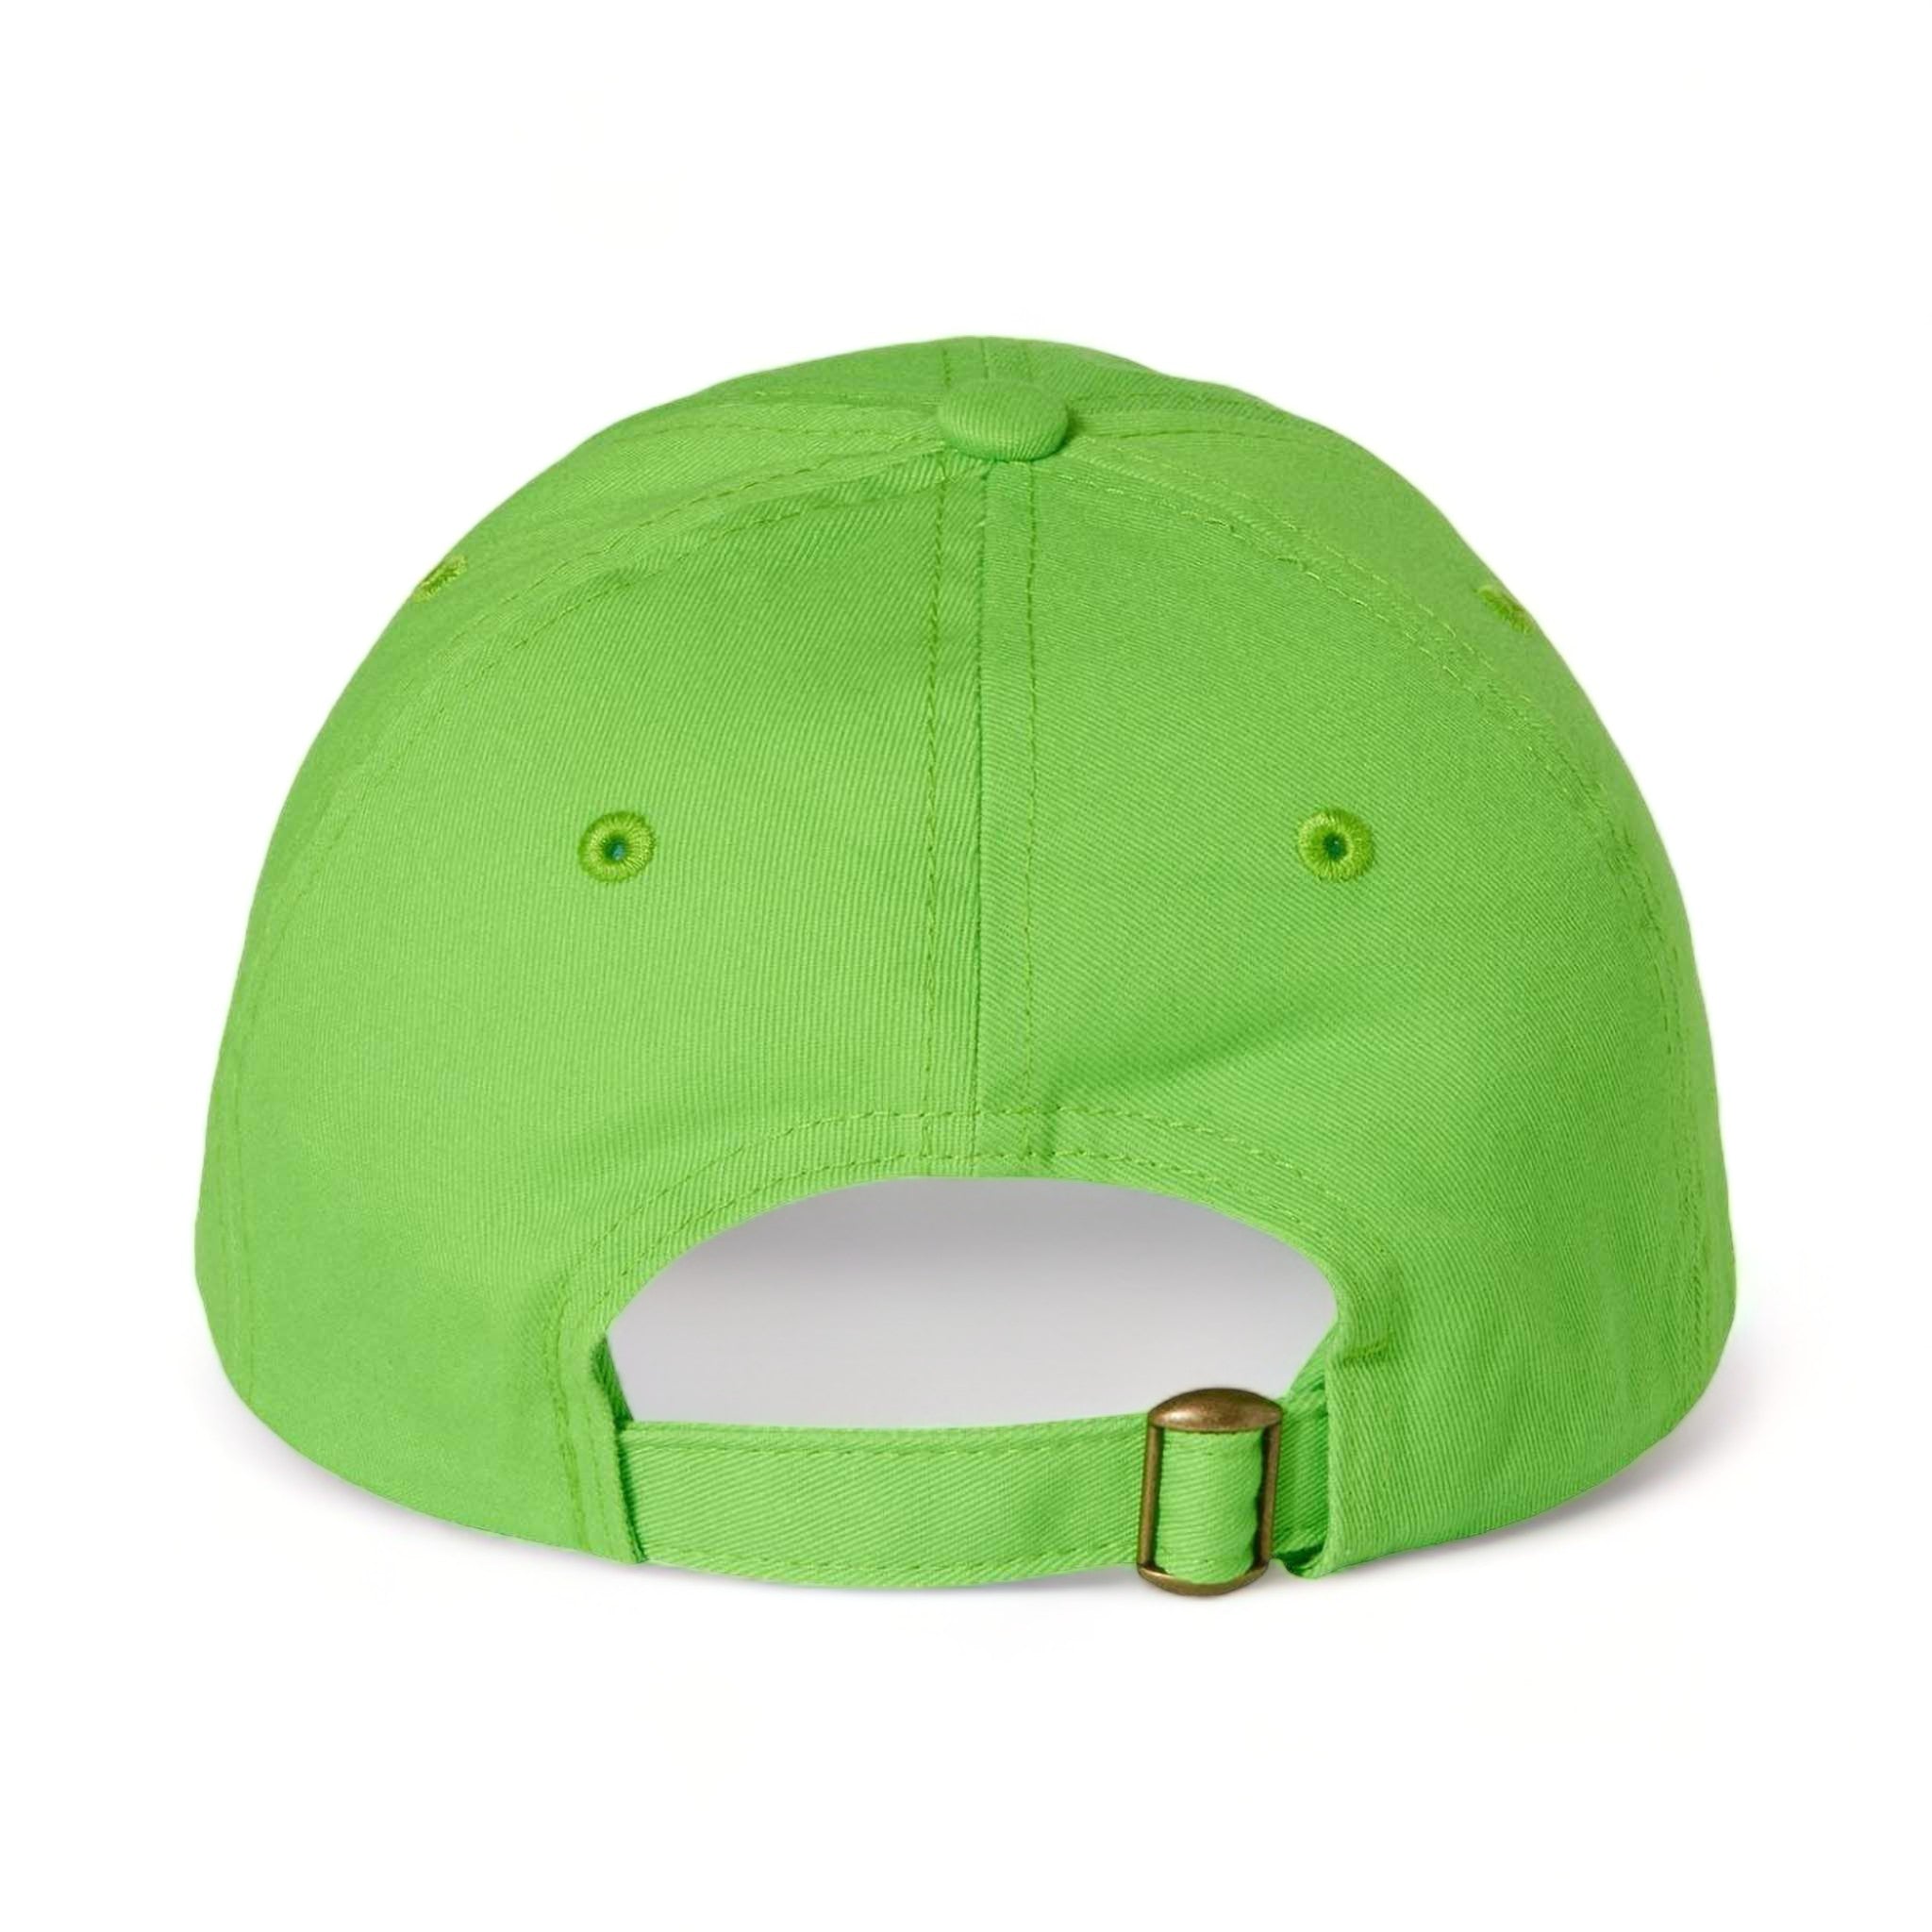 Back view of Valucap VC300A custom hat in neon green